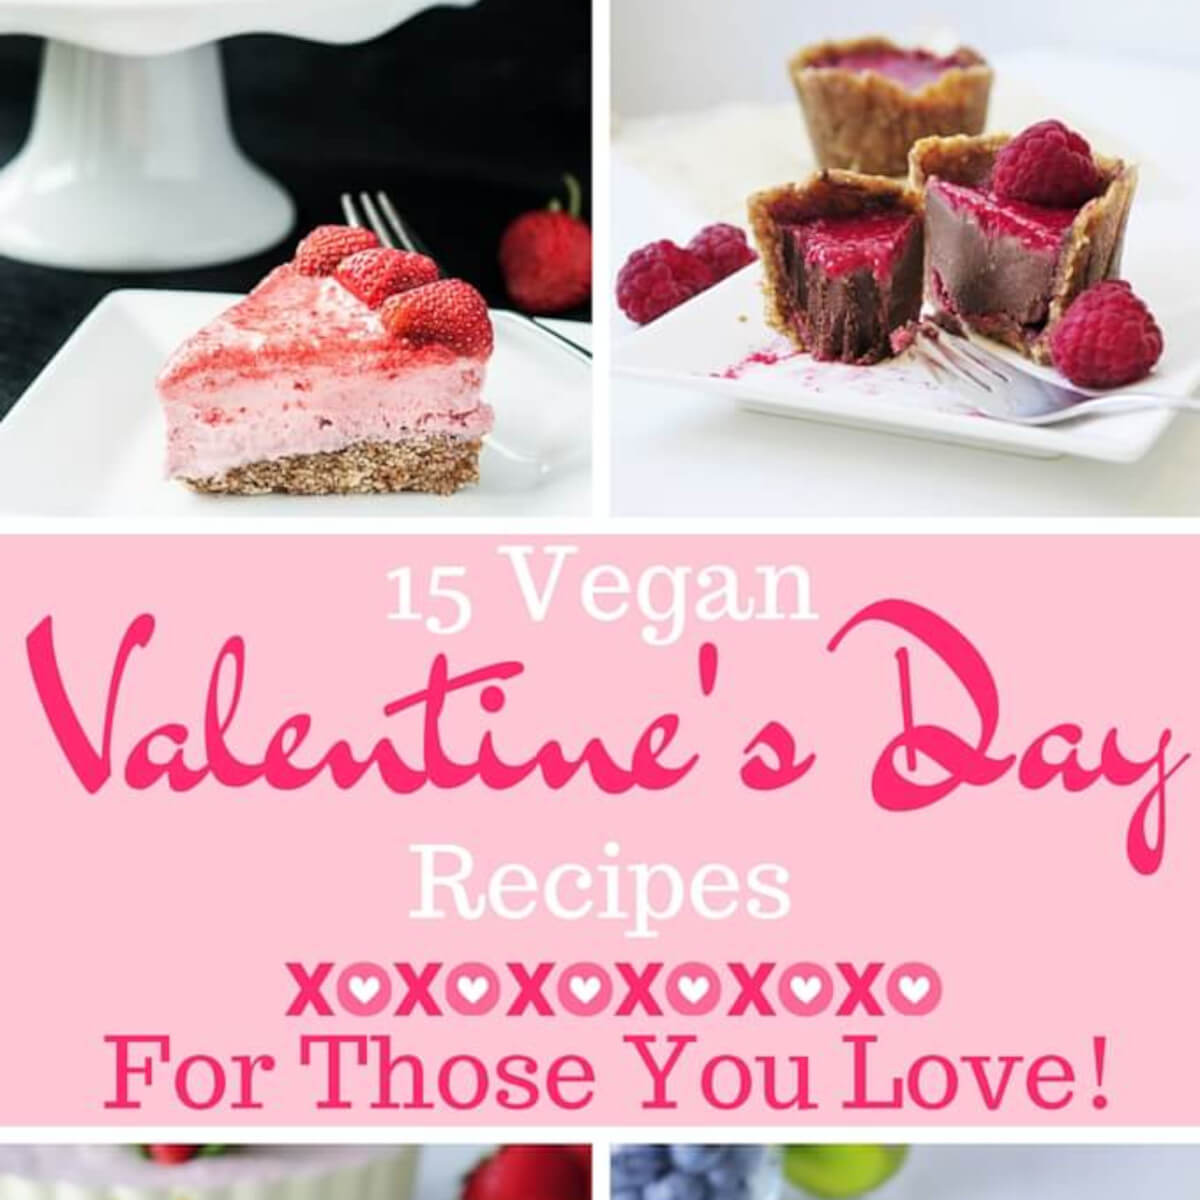 Vegan Valentine 's Day Recipes for those you love #dessert #sweet #plantbased